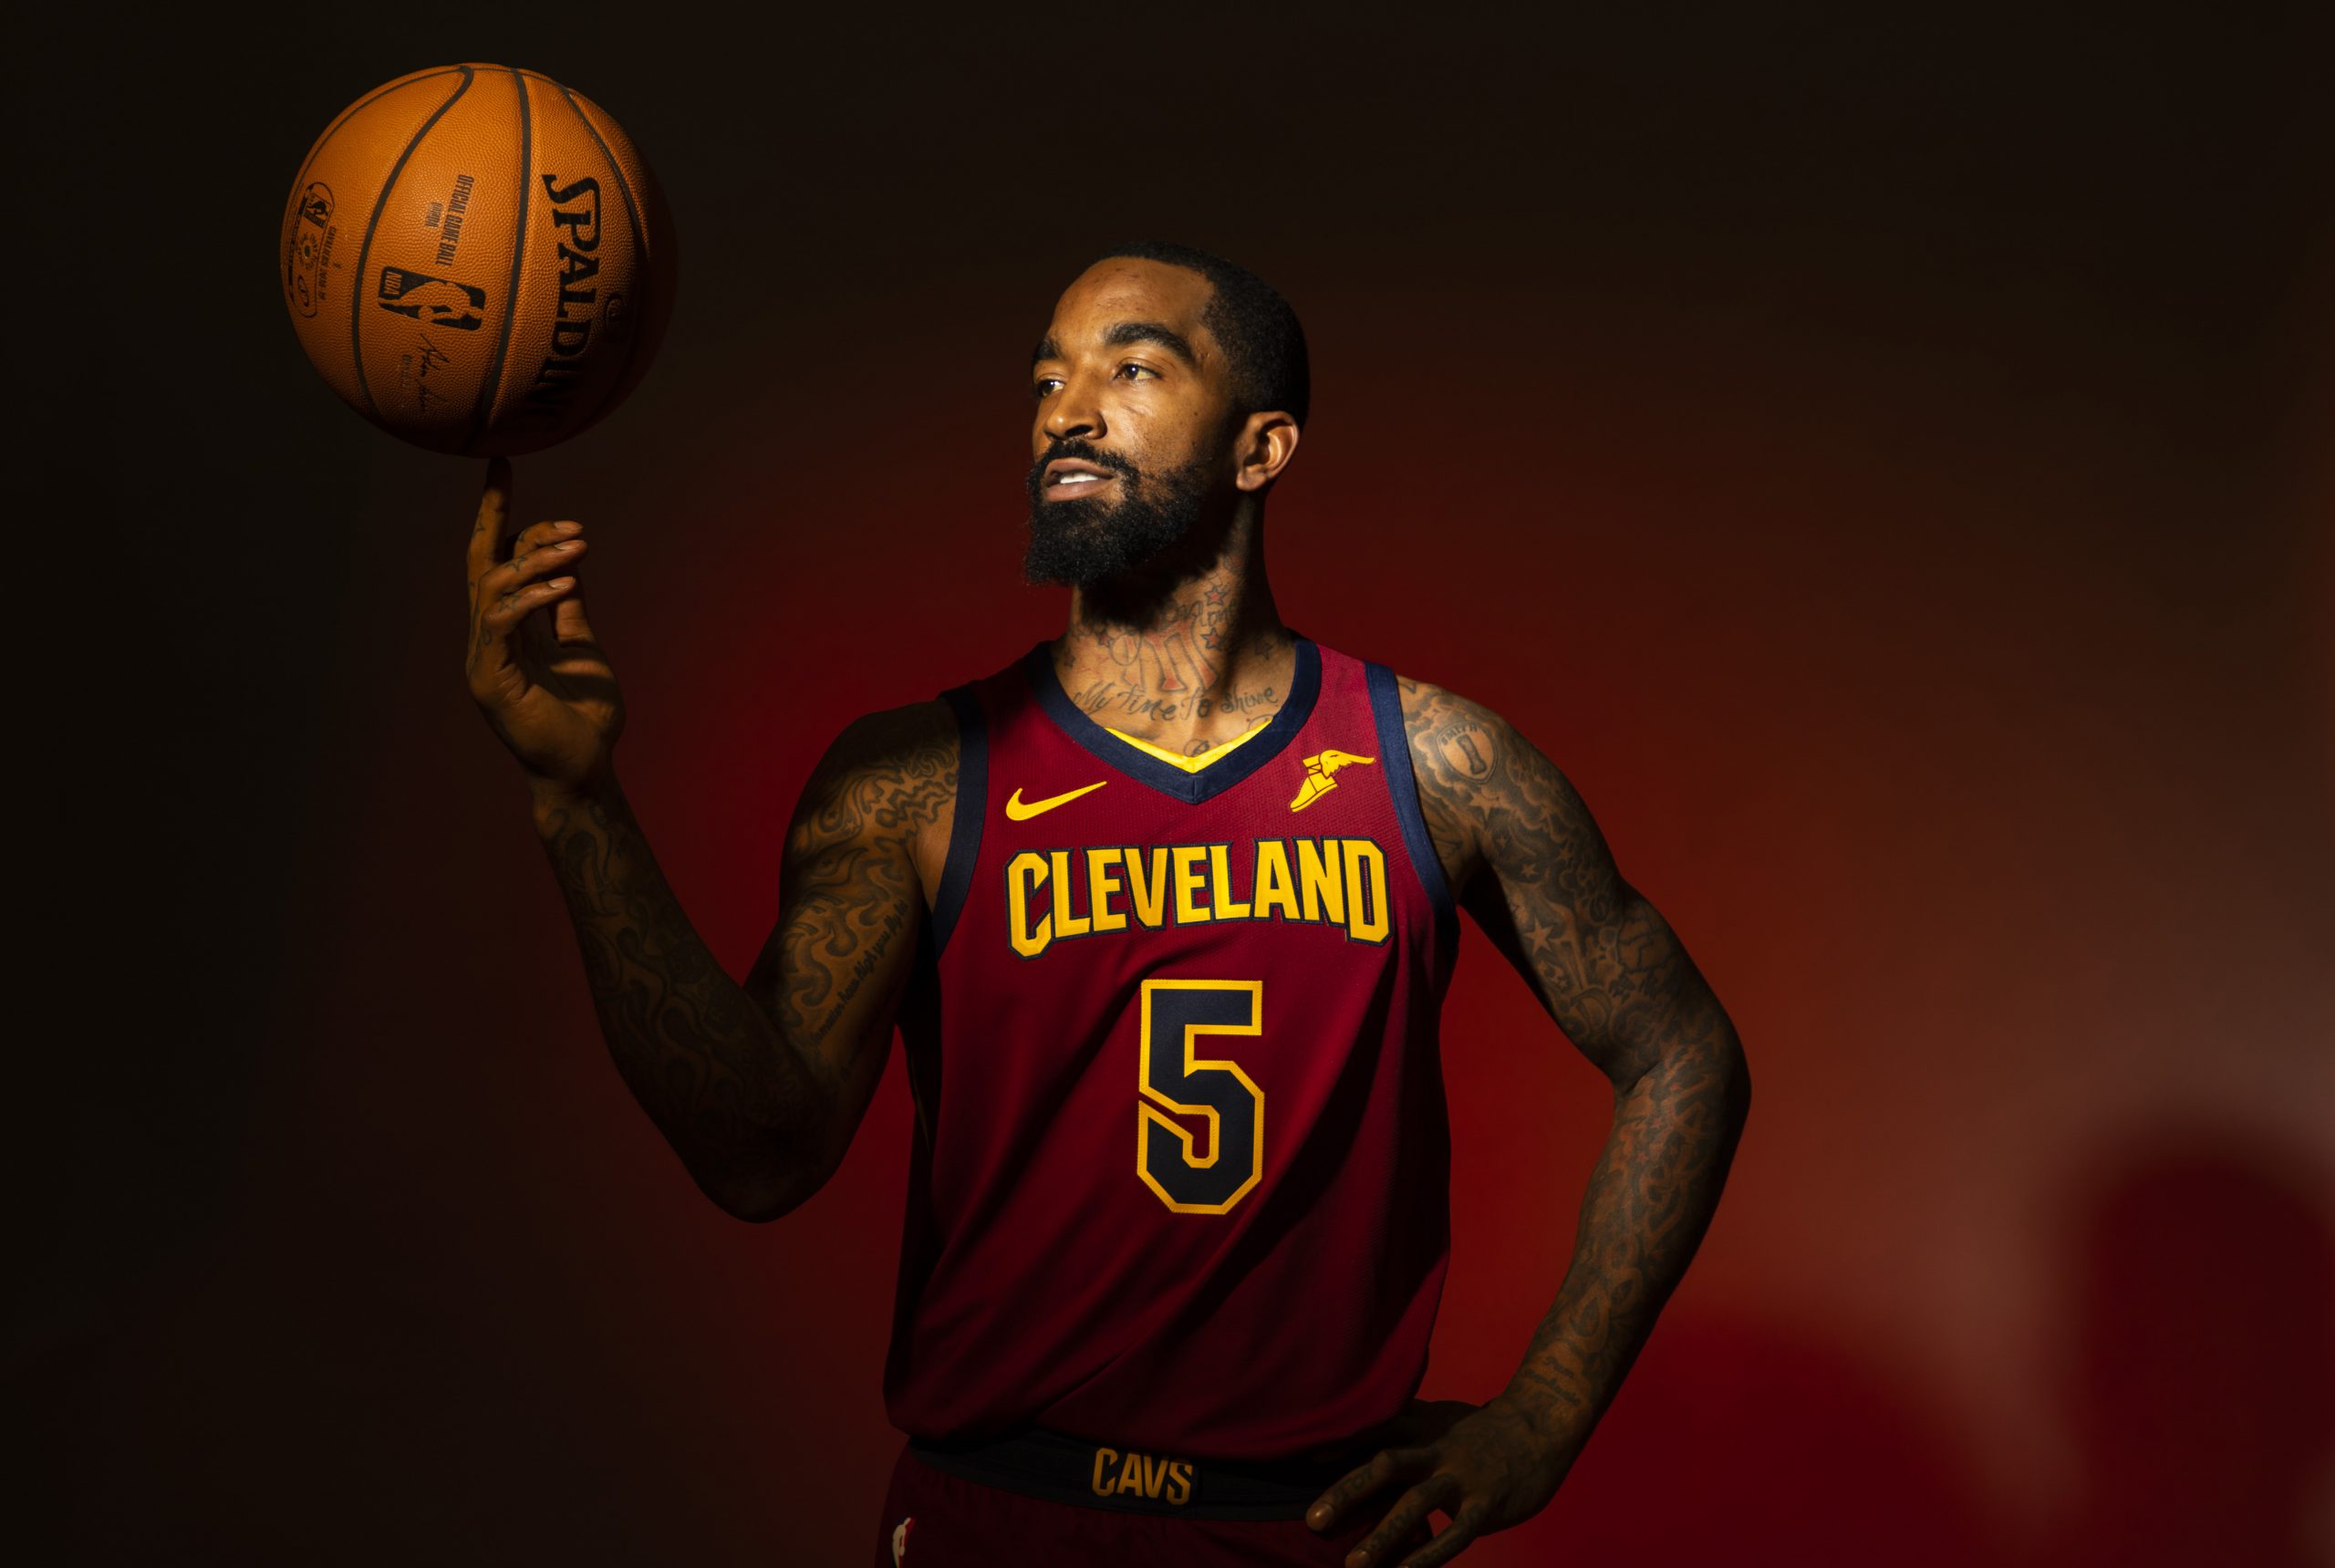 Cleveland Cavaliers planning to waive JR Smith, sources say 